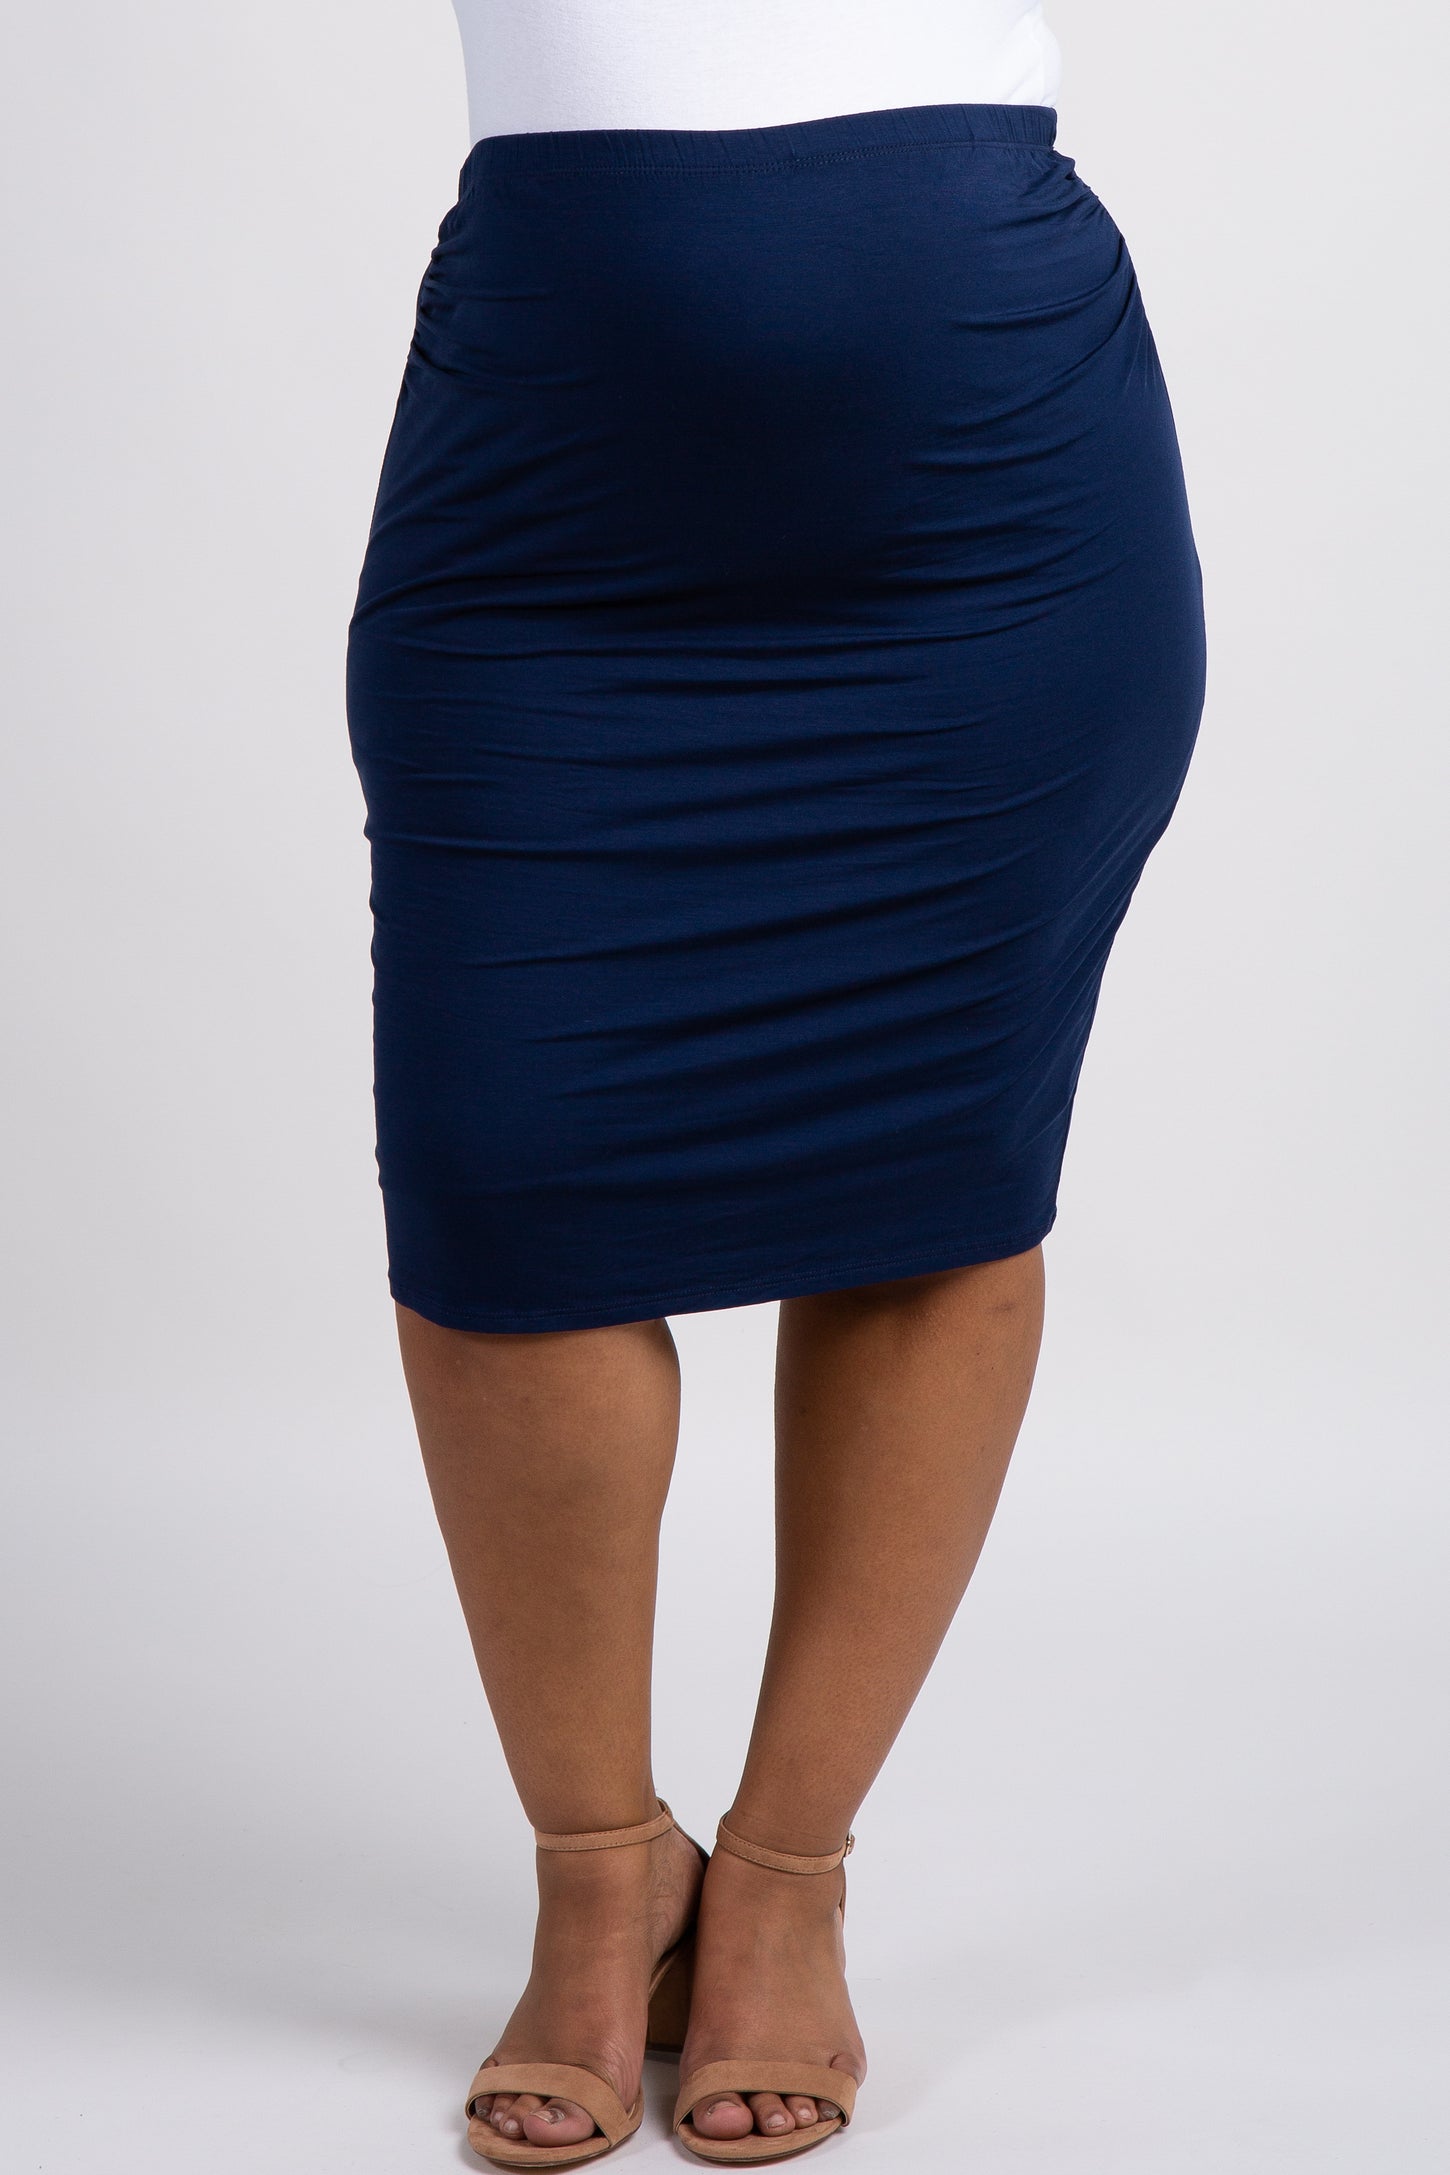 Navy Blue Fitted Plus Maternity Pencil Skirt